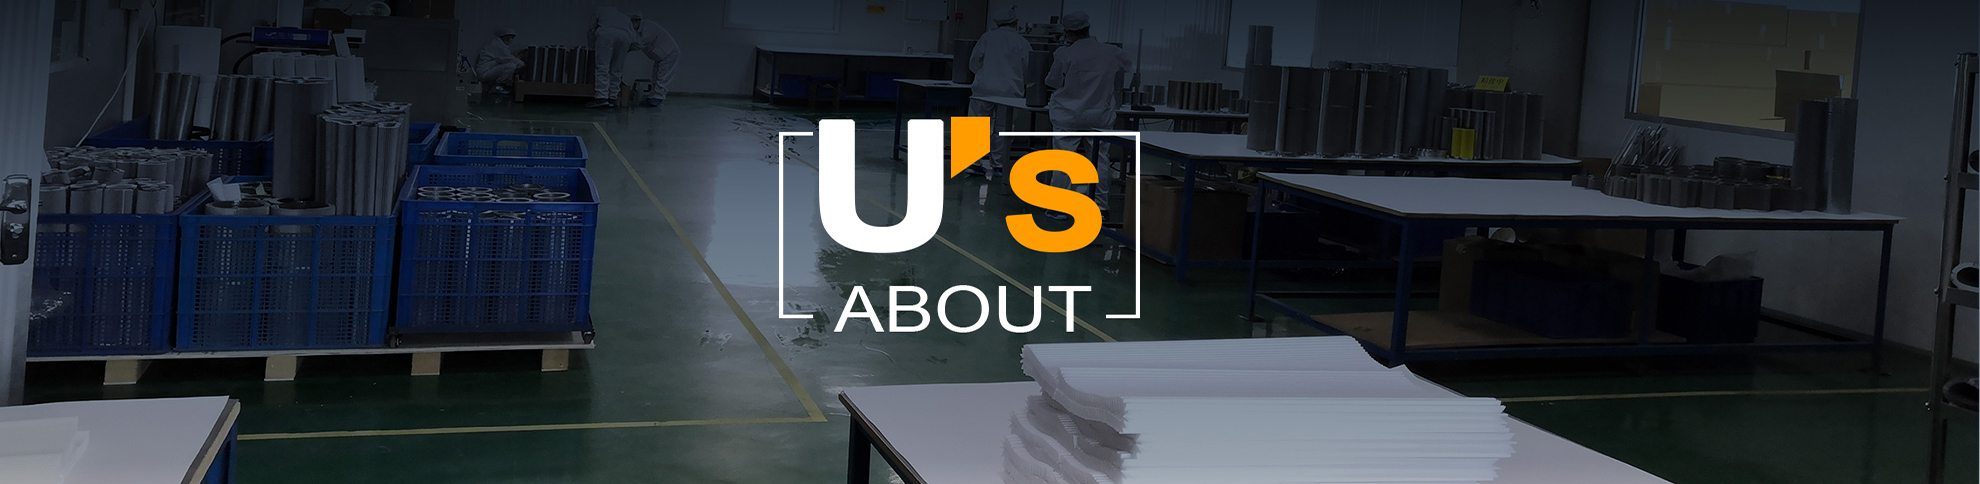 About-Us banner